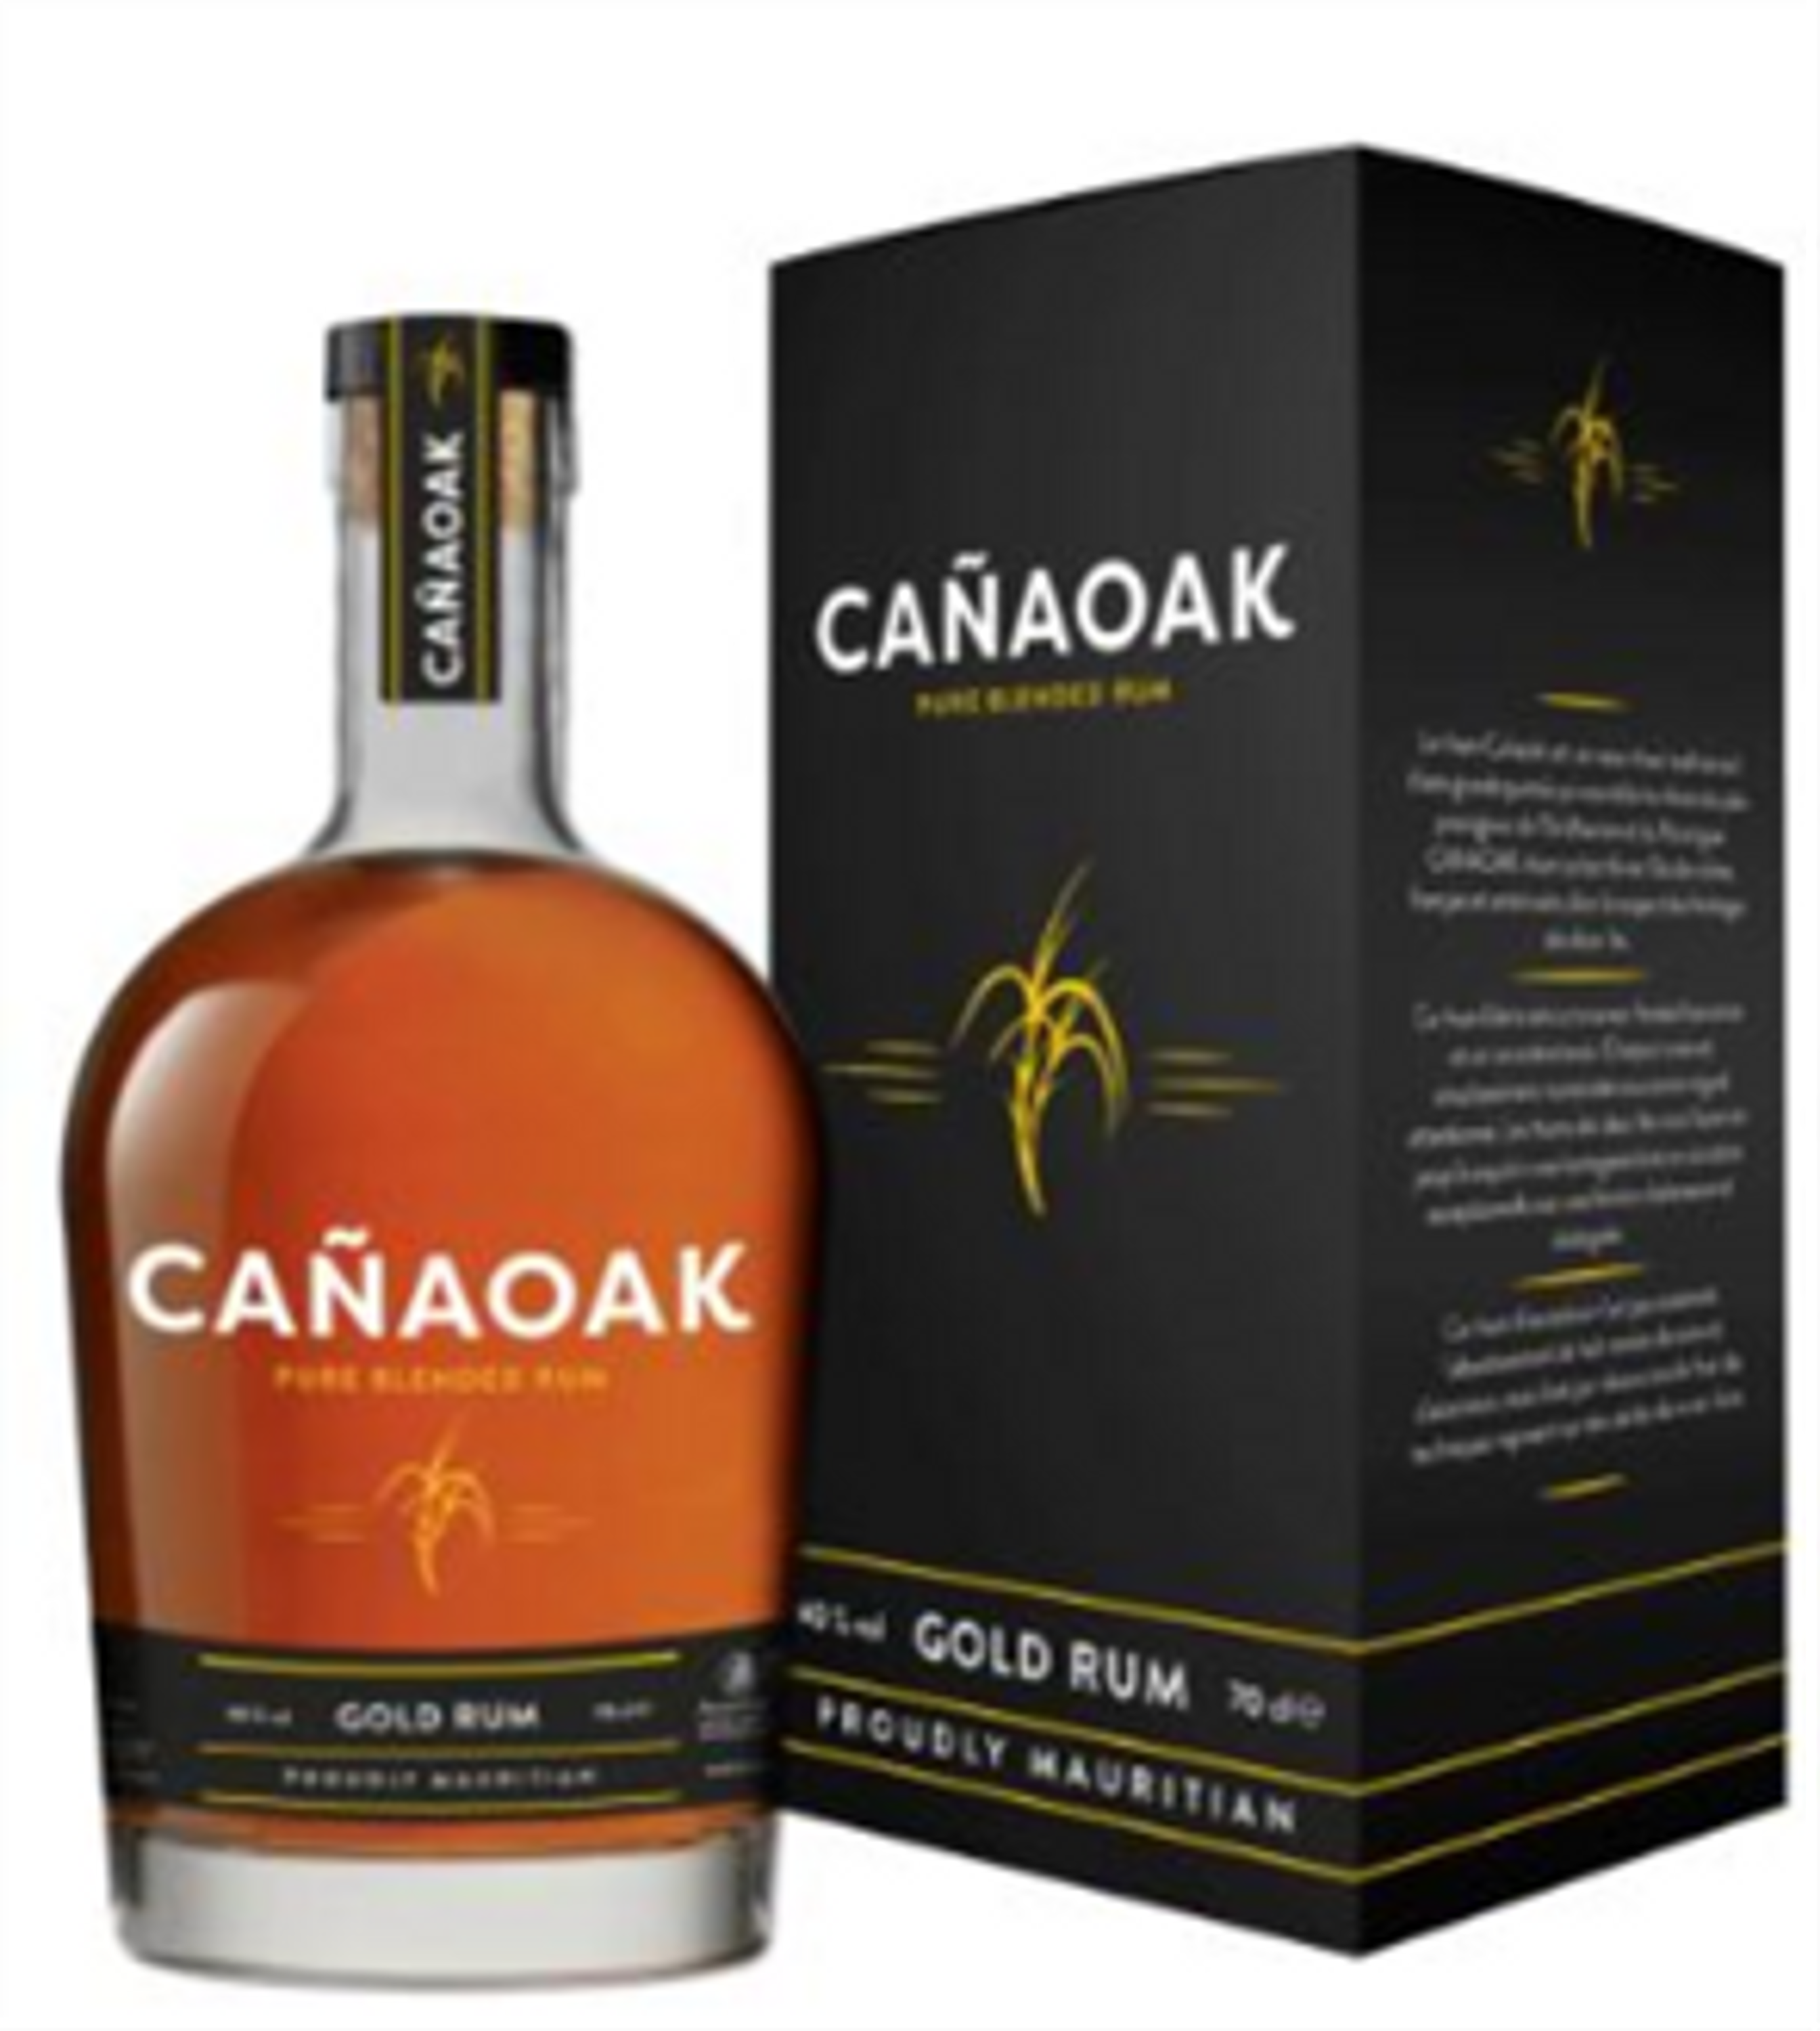 Canaoak Pure Blended Gold Rum 0.7l, alc. 40% by volume, Mauritius Rum